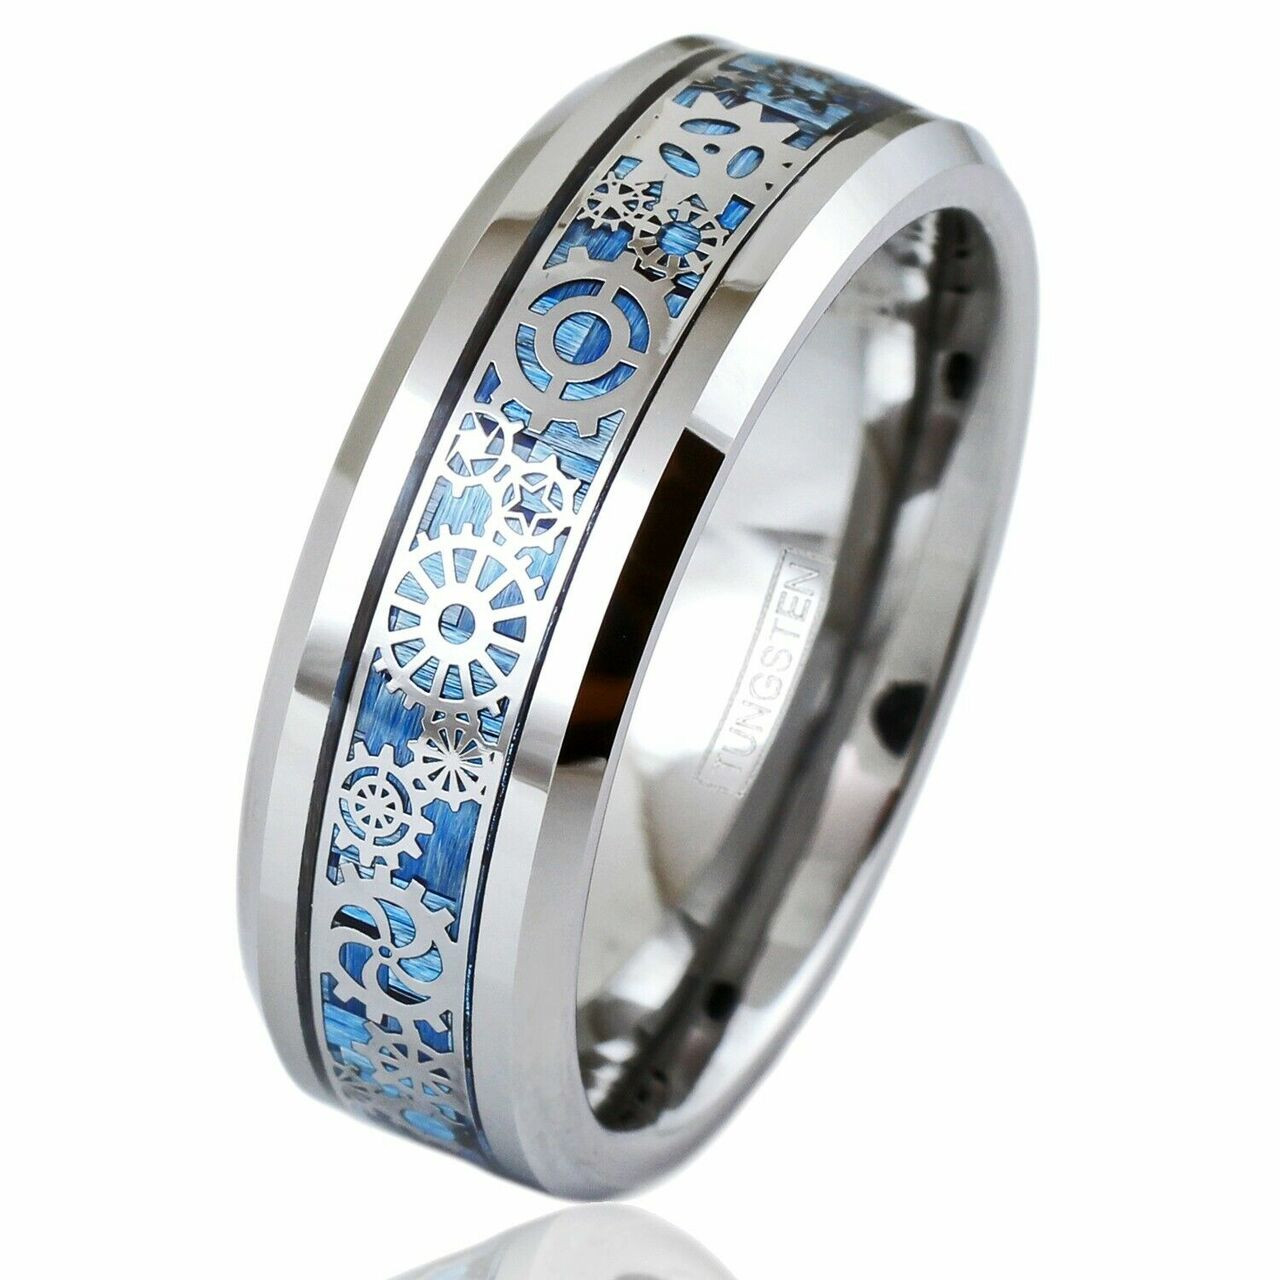 THREE KEYS JEWELRY 8mm Tungsten Rings Silver Punk Seal Gear Mechanical  Light Blue Carbon Fiber with Metal Foil Inlay Wedding Bands for Men and  Women on OnBuy